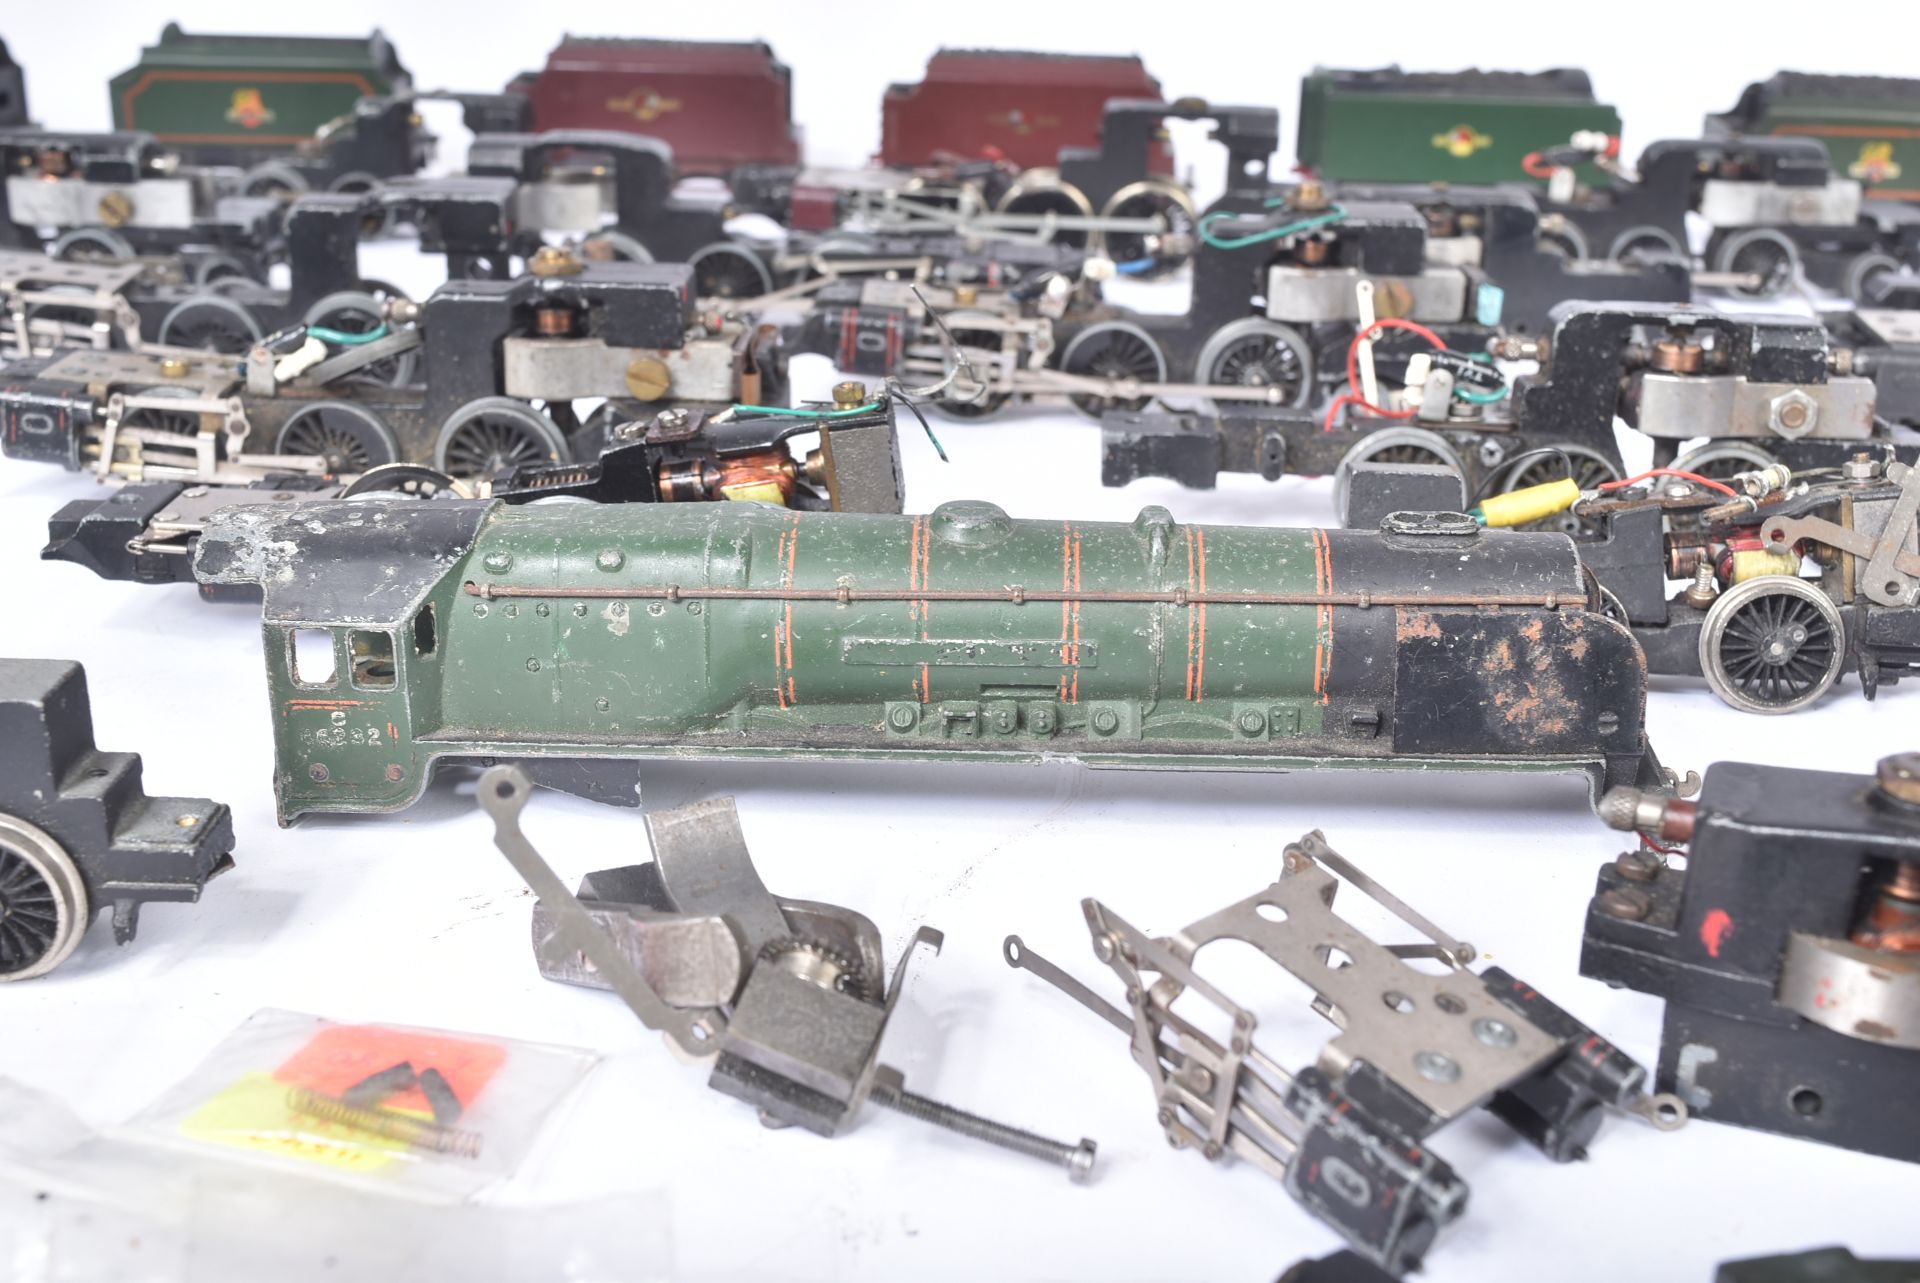 MODEL RAILWAY - COLLECTION OF OO GAUGE LOCOMOTIVE ENGINE SPARE PARTS - Image 4 of 6